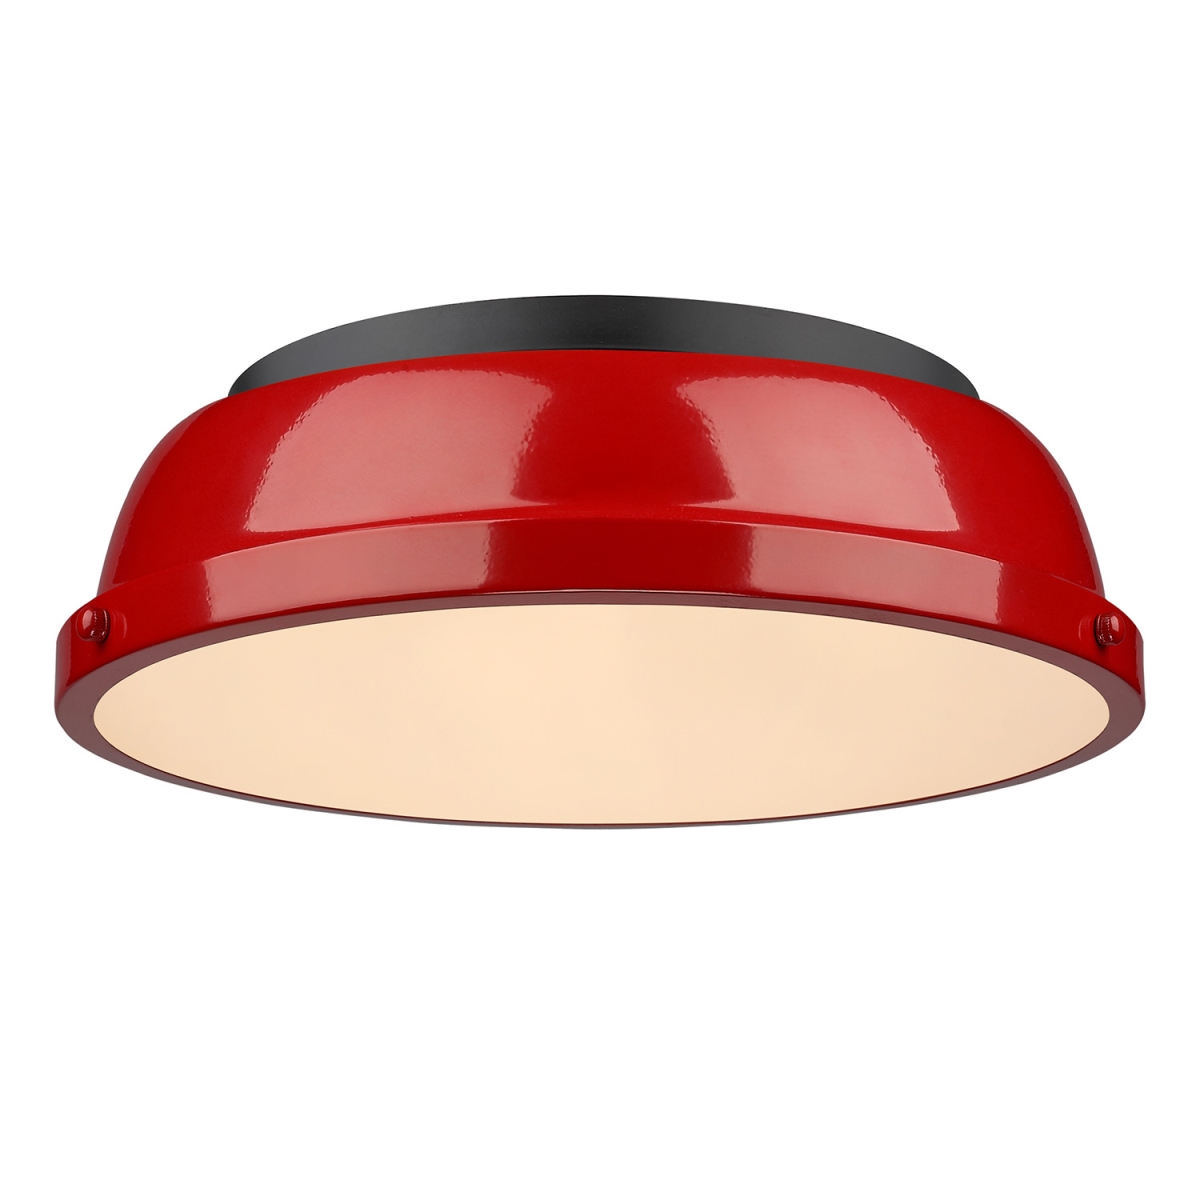 Picture of Golden Lighting 3602-14 BLK-RD Duncan 14 in. Flush Mount Light with Red Shade, Black